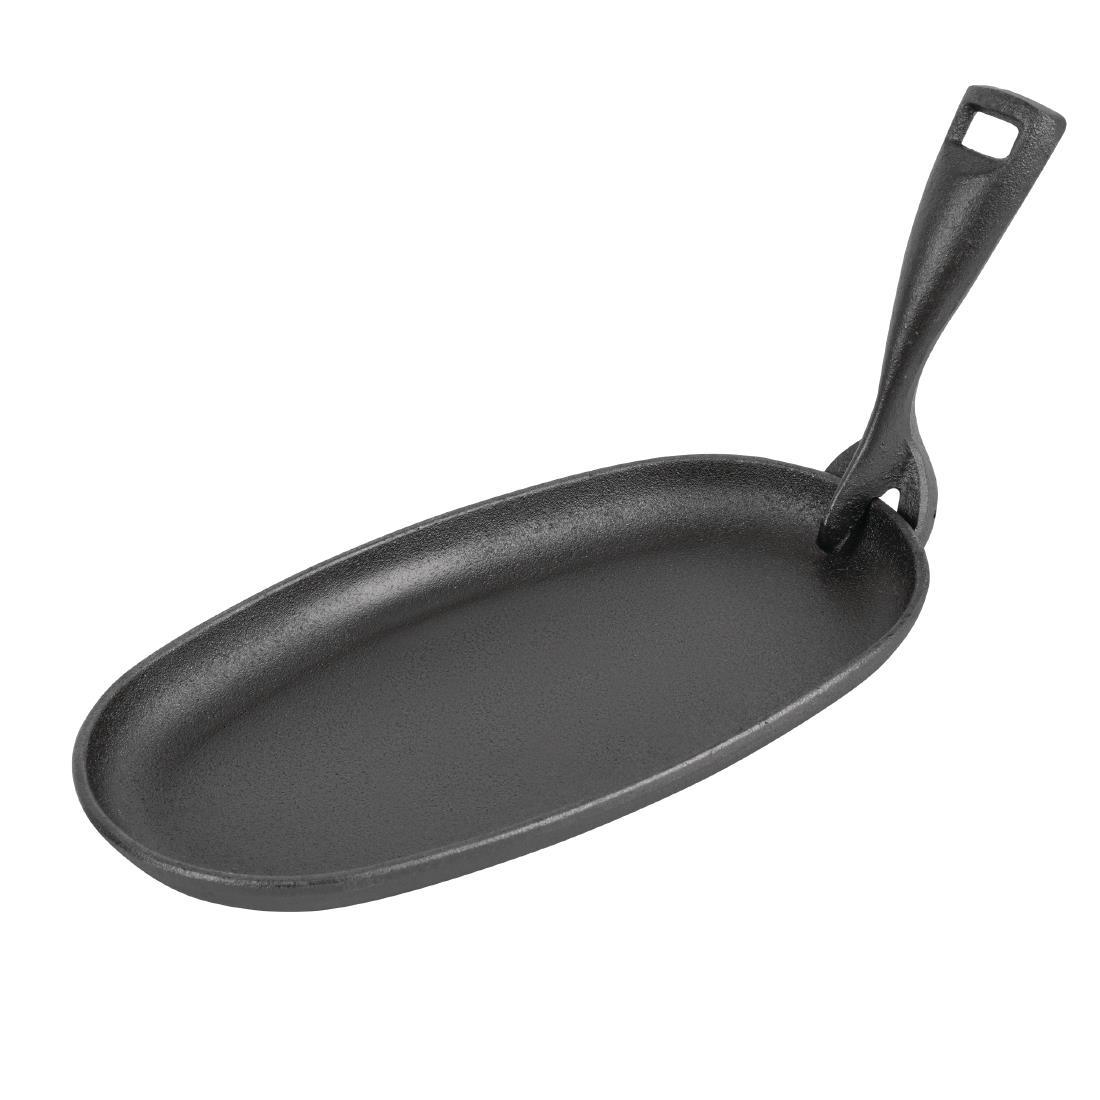 Olympia Cast Iron Sizzler Pan - GG133  - 1